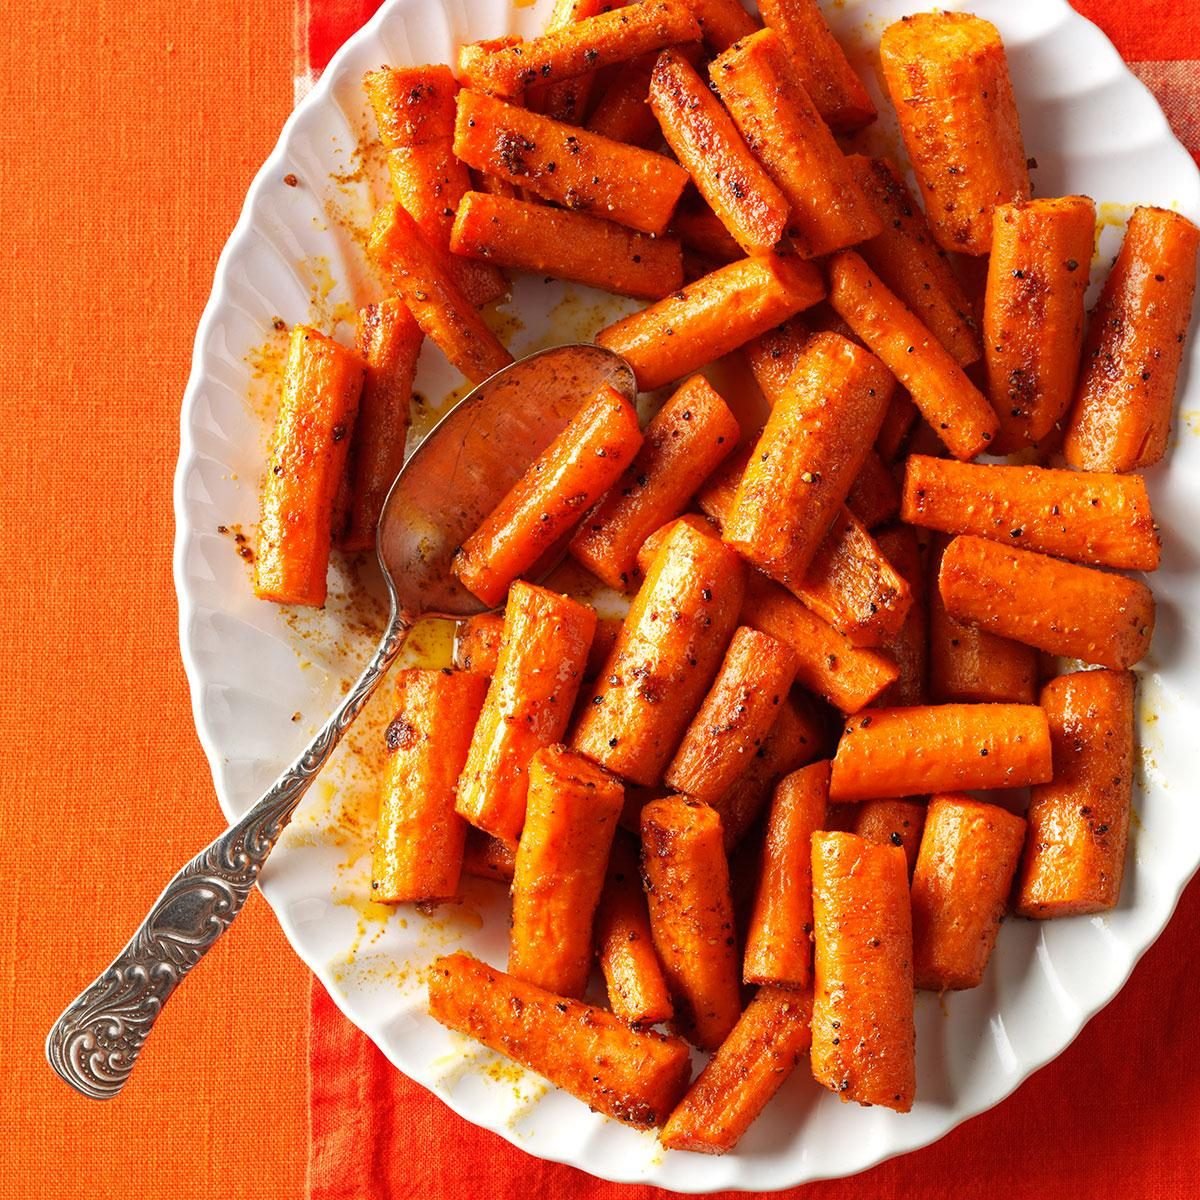 Oven-Roasted Spiced Carrots